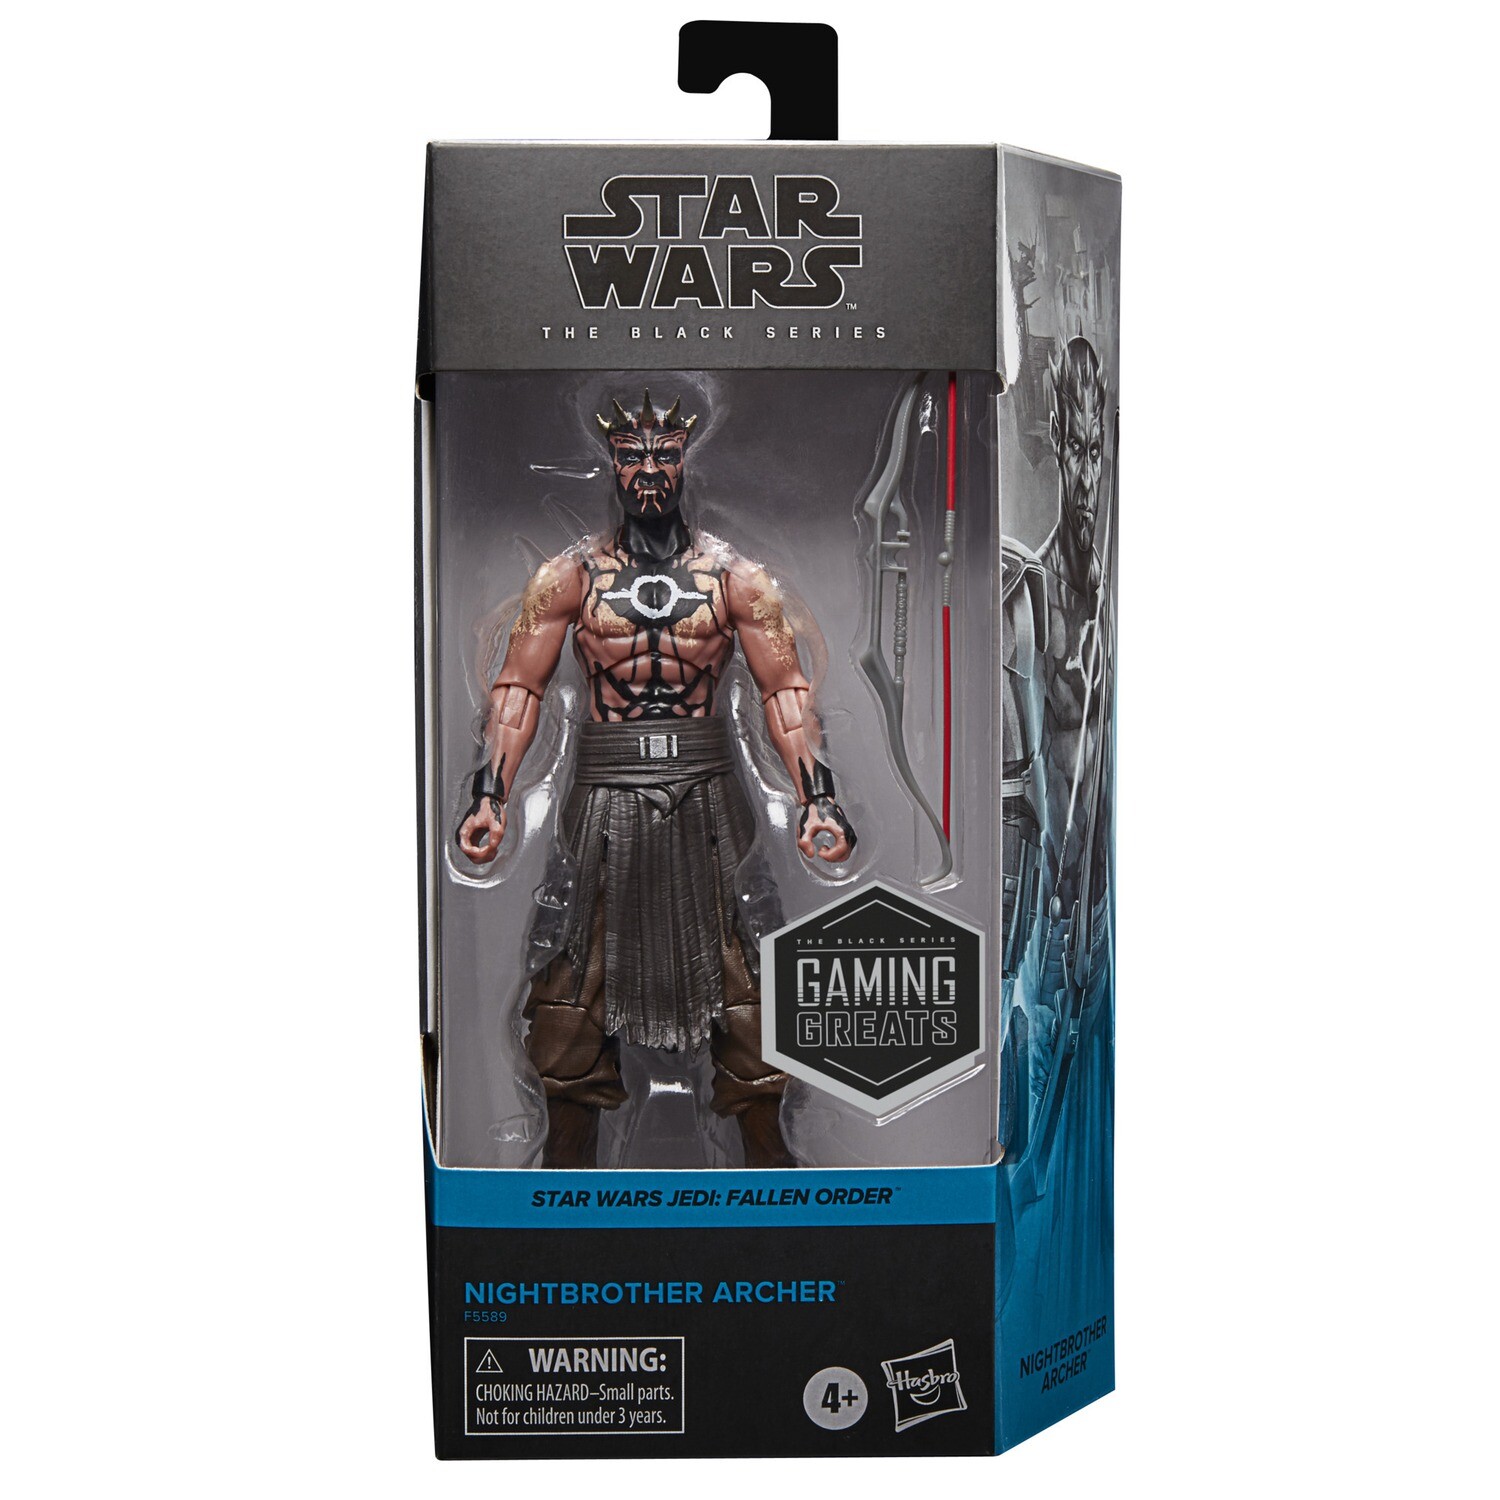 Star Wars Black Series Gaming Greats Nightbrother Archer